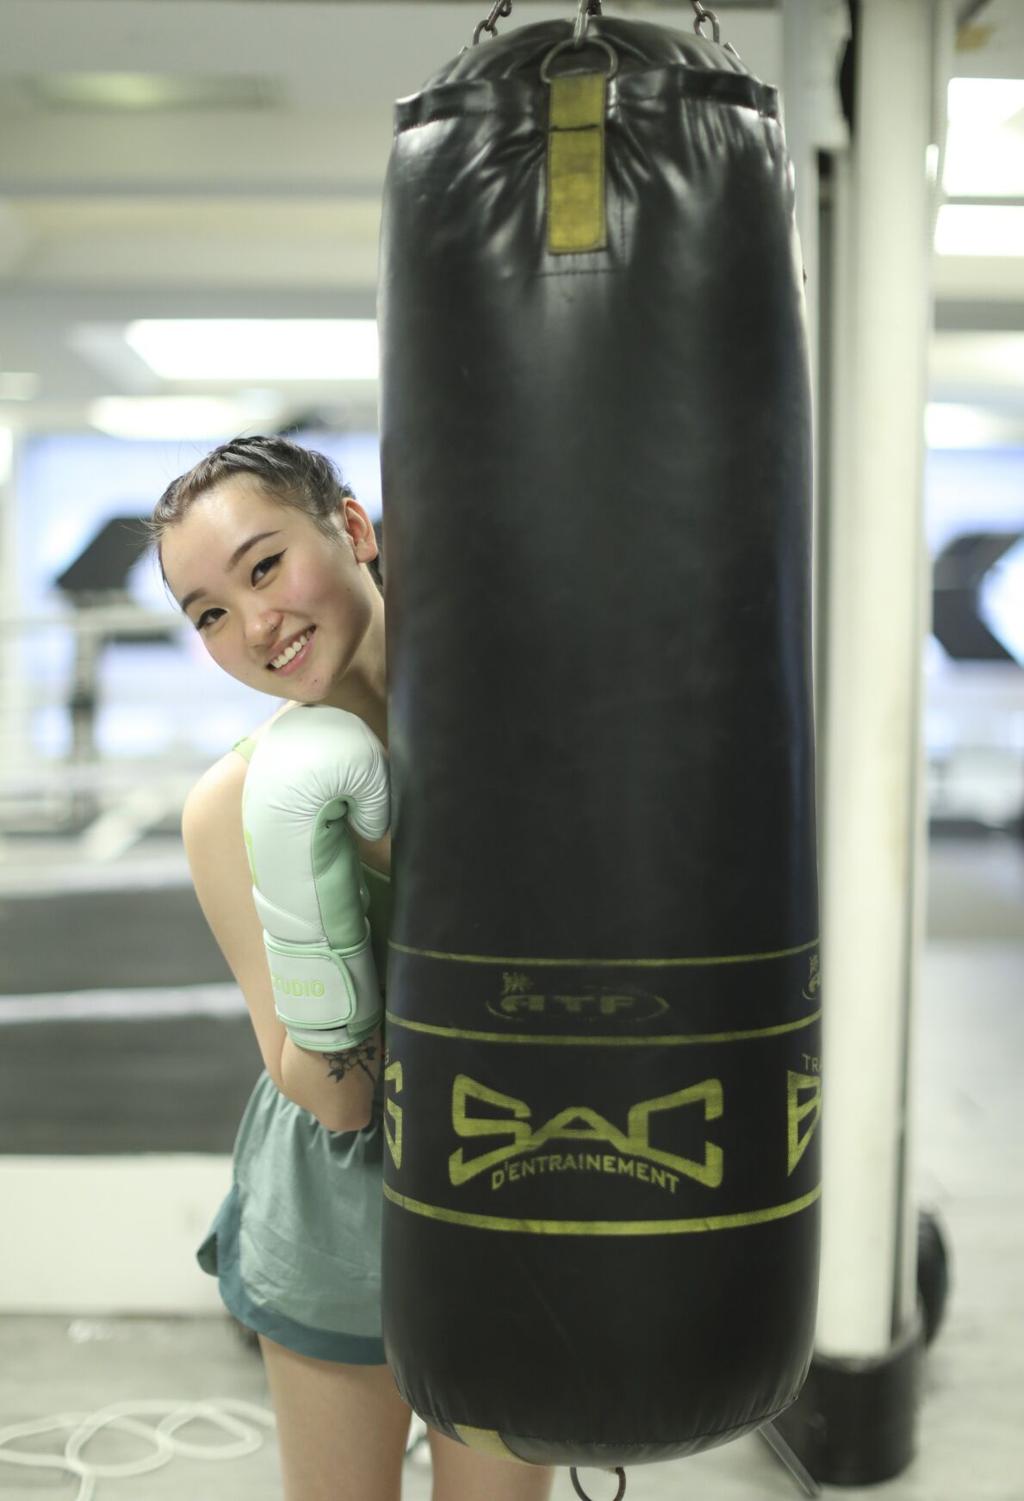 This Toronto boxer couldn't find gear made for women. So she